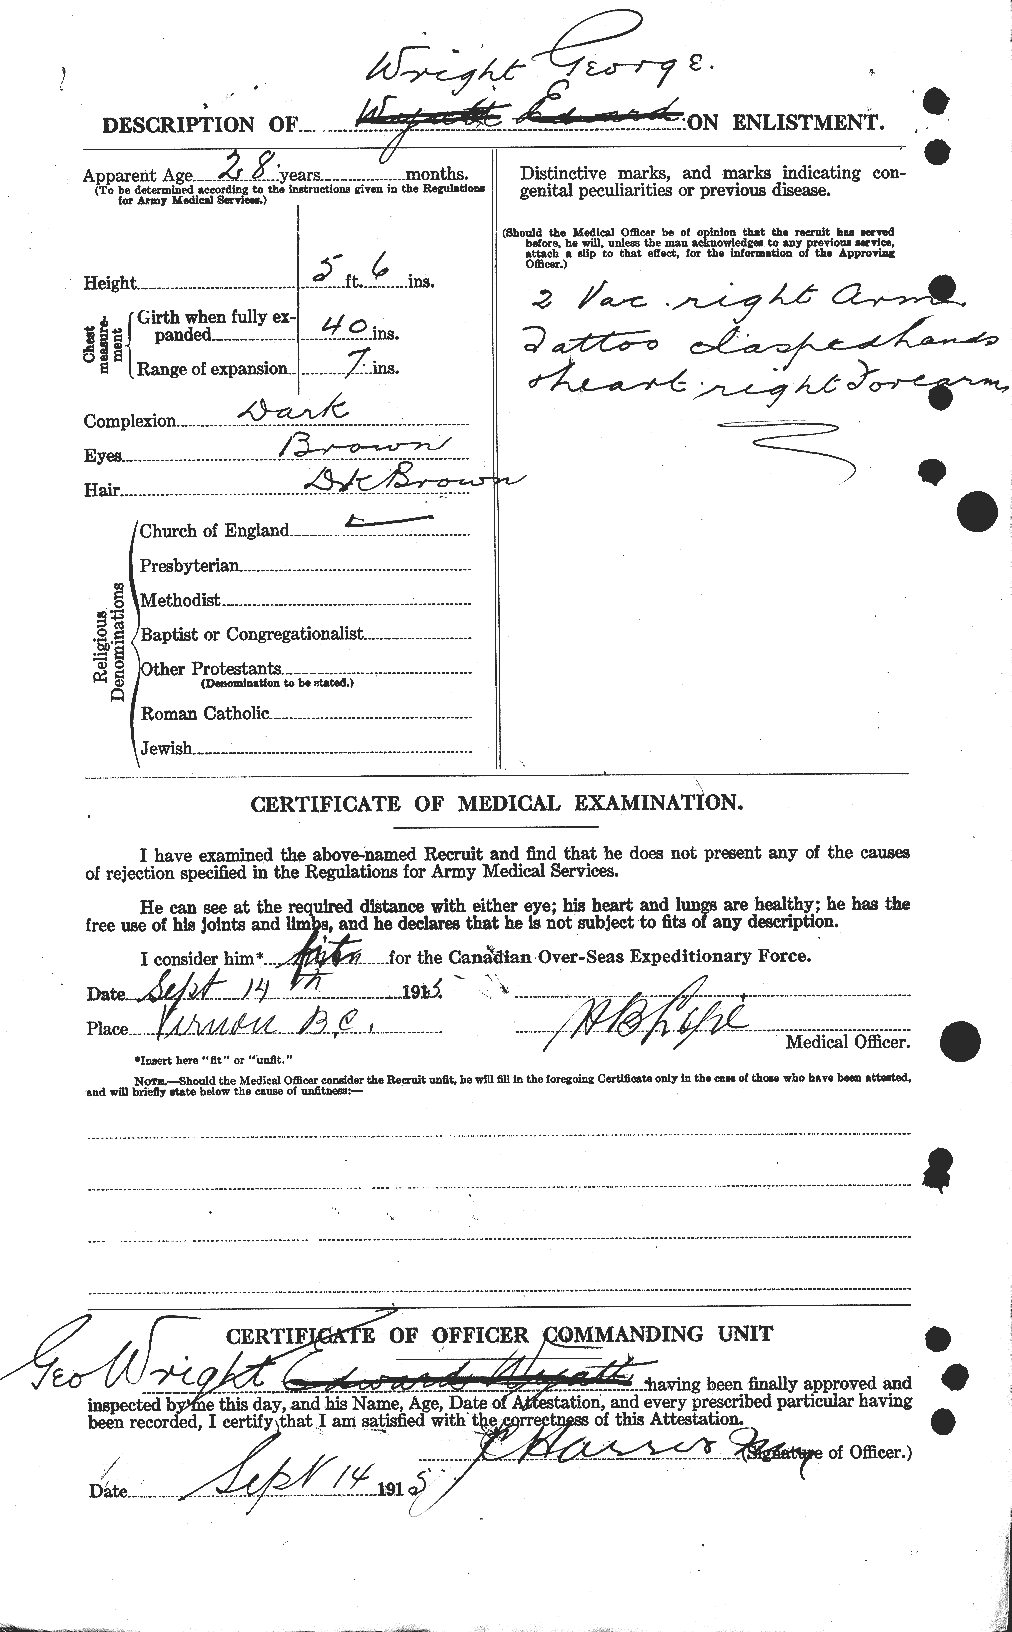 Personnel Records of the First World War - CEF 683987b